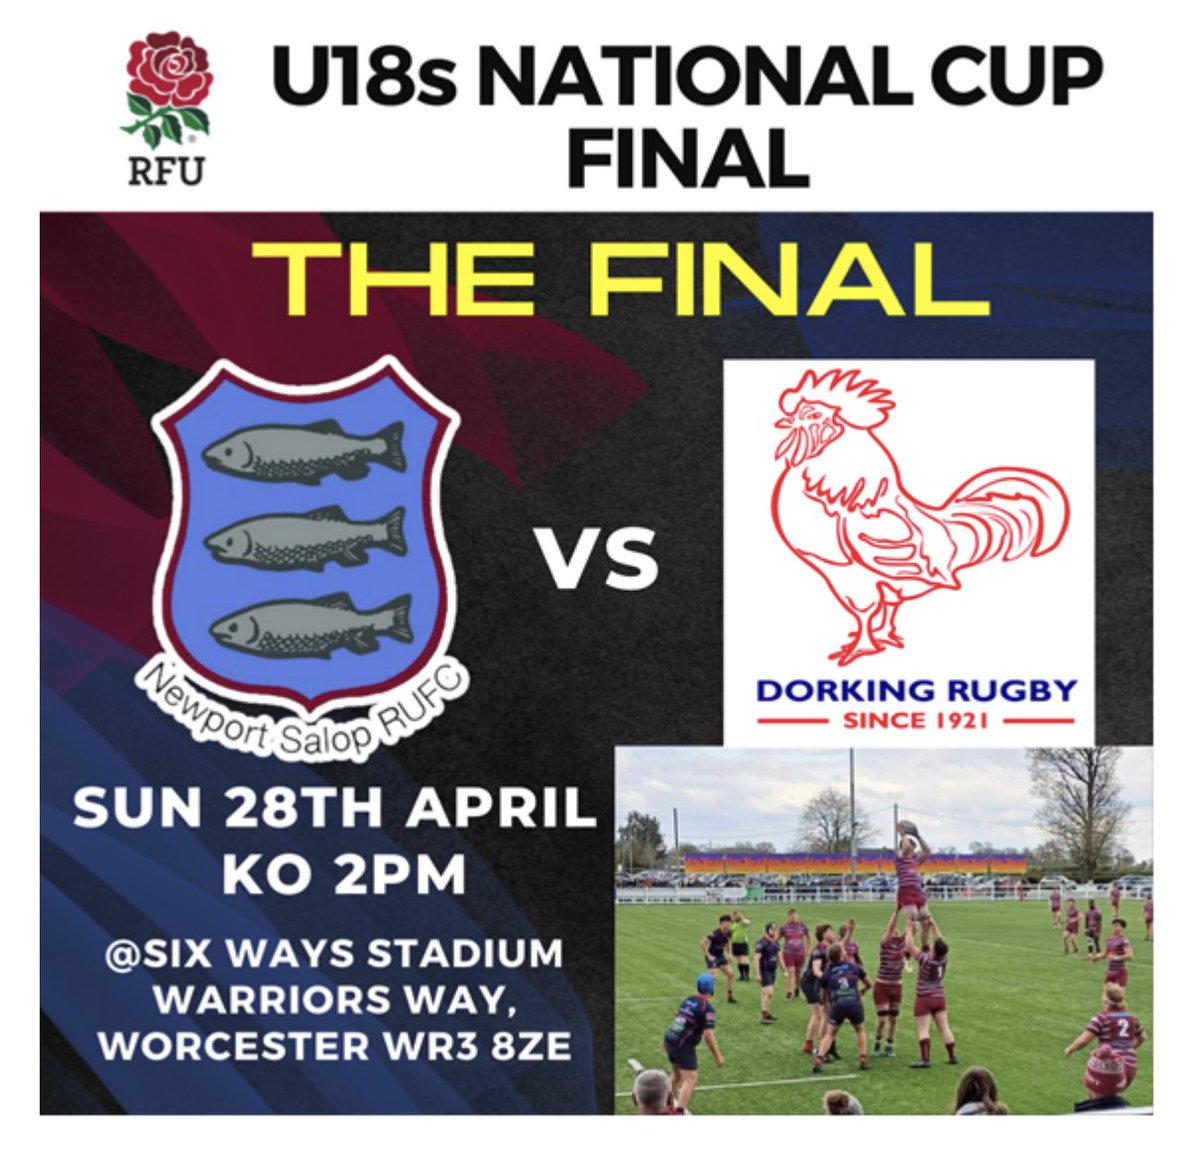 Congratulations to @NewportSalopRFC reaching the finals of the National Colts Cup against Dorking. Match to be played at Sixways Stadium Sunday 28th April at 2:00pm - all support welcome.